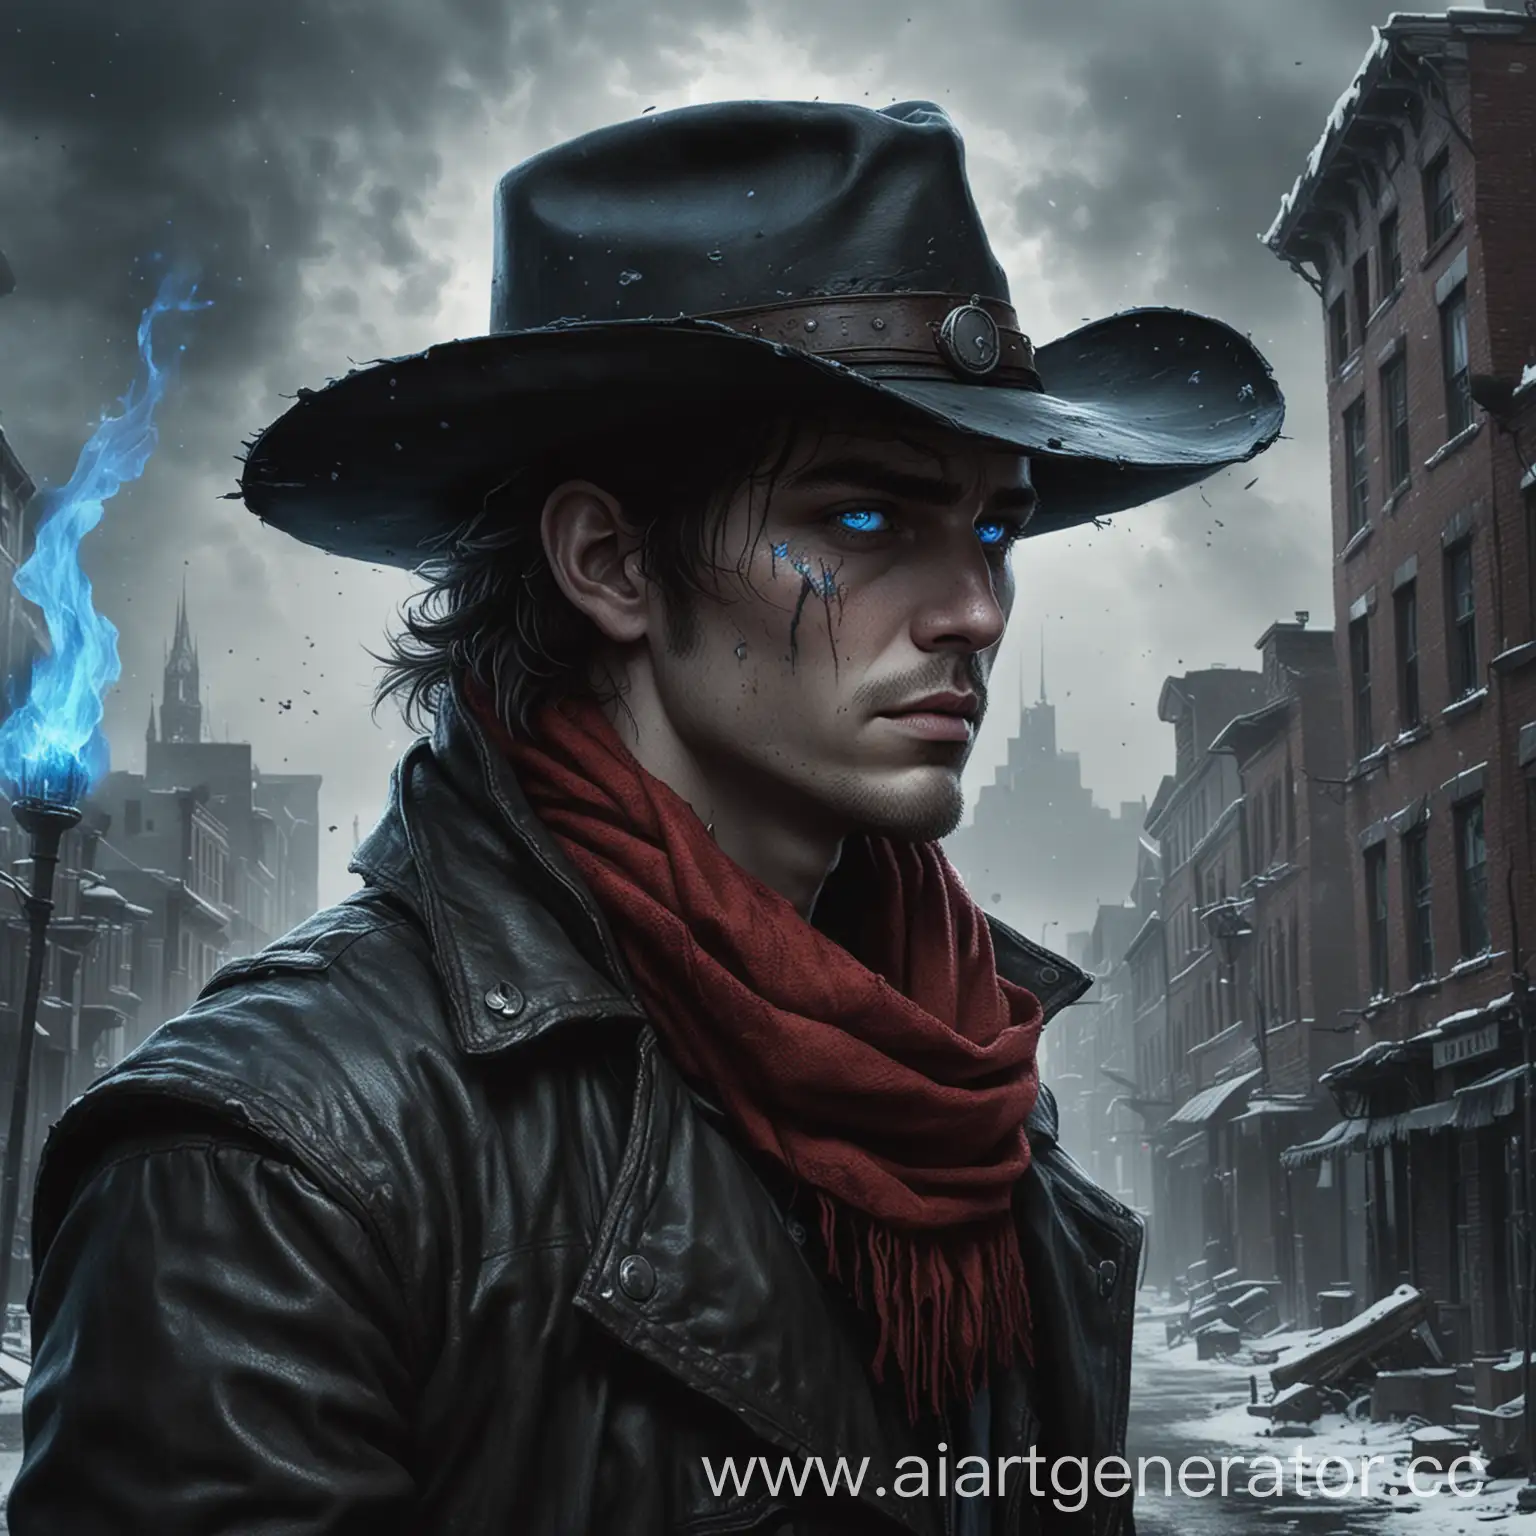 Pixelated-Dark-Fantasy-Portrait-Young-Man-with-Glowing-Blue-Flames-in-a-Desolate-Cityscape